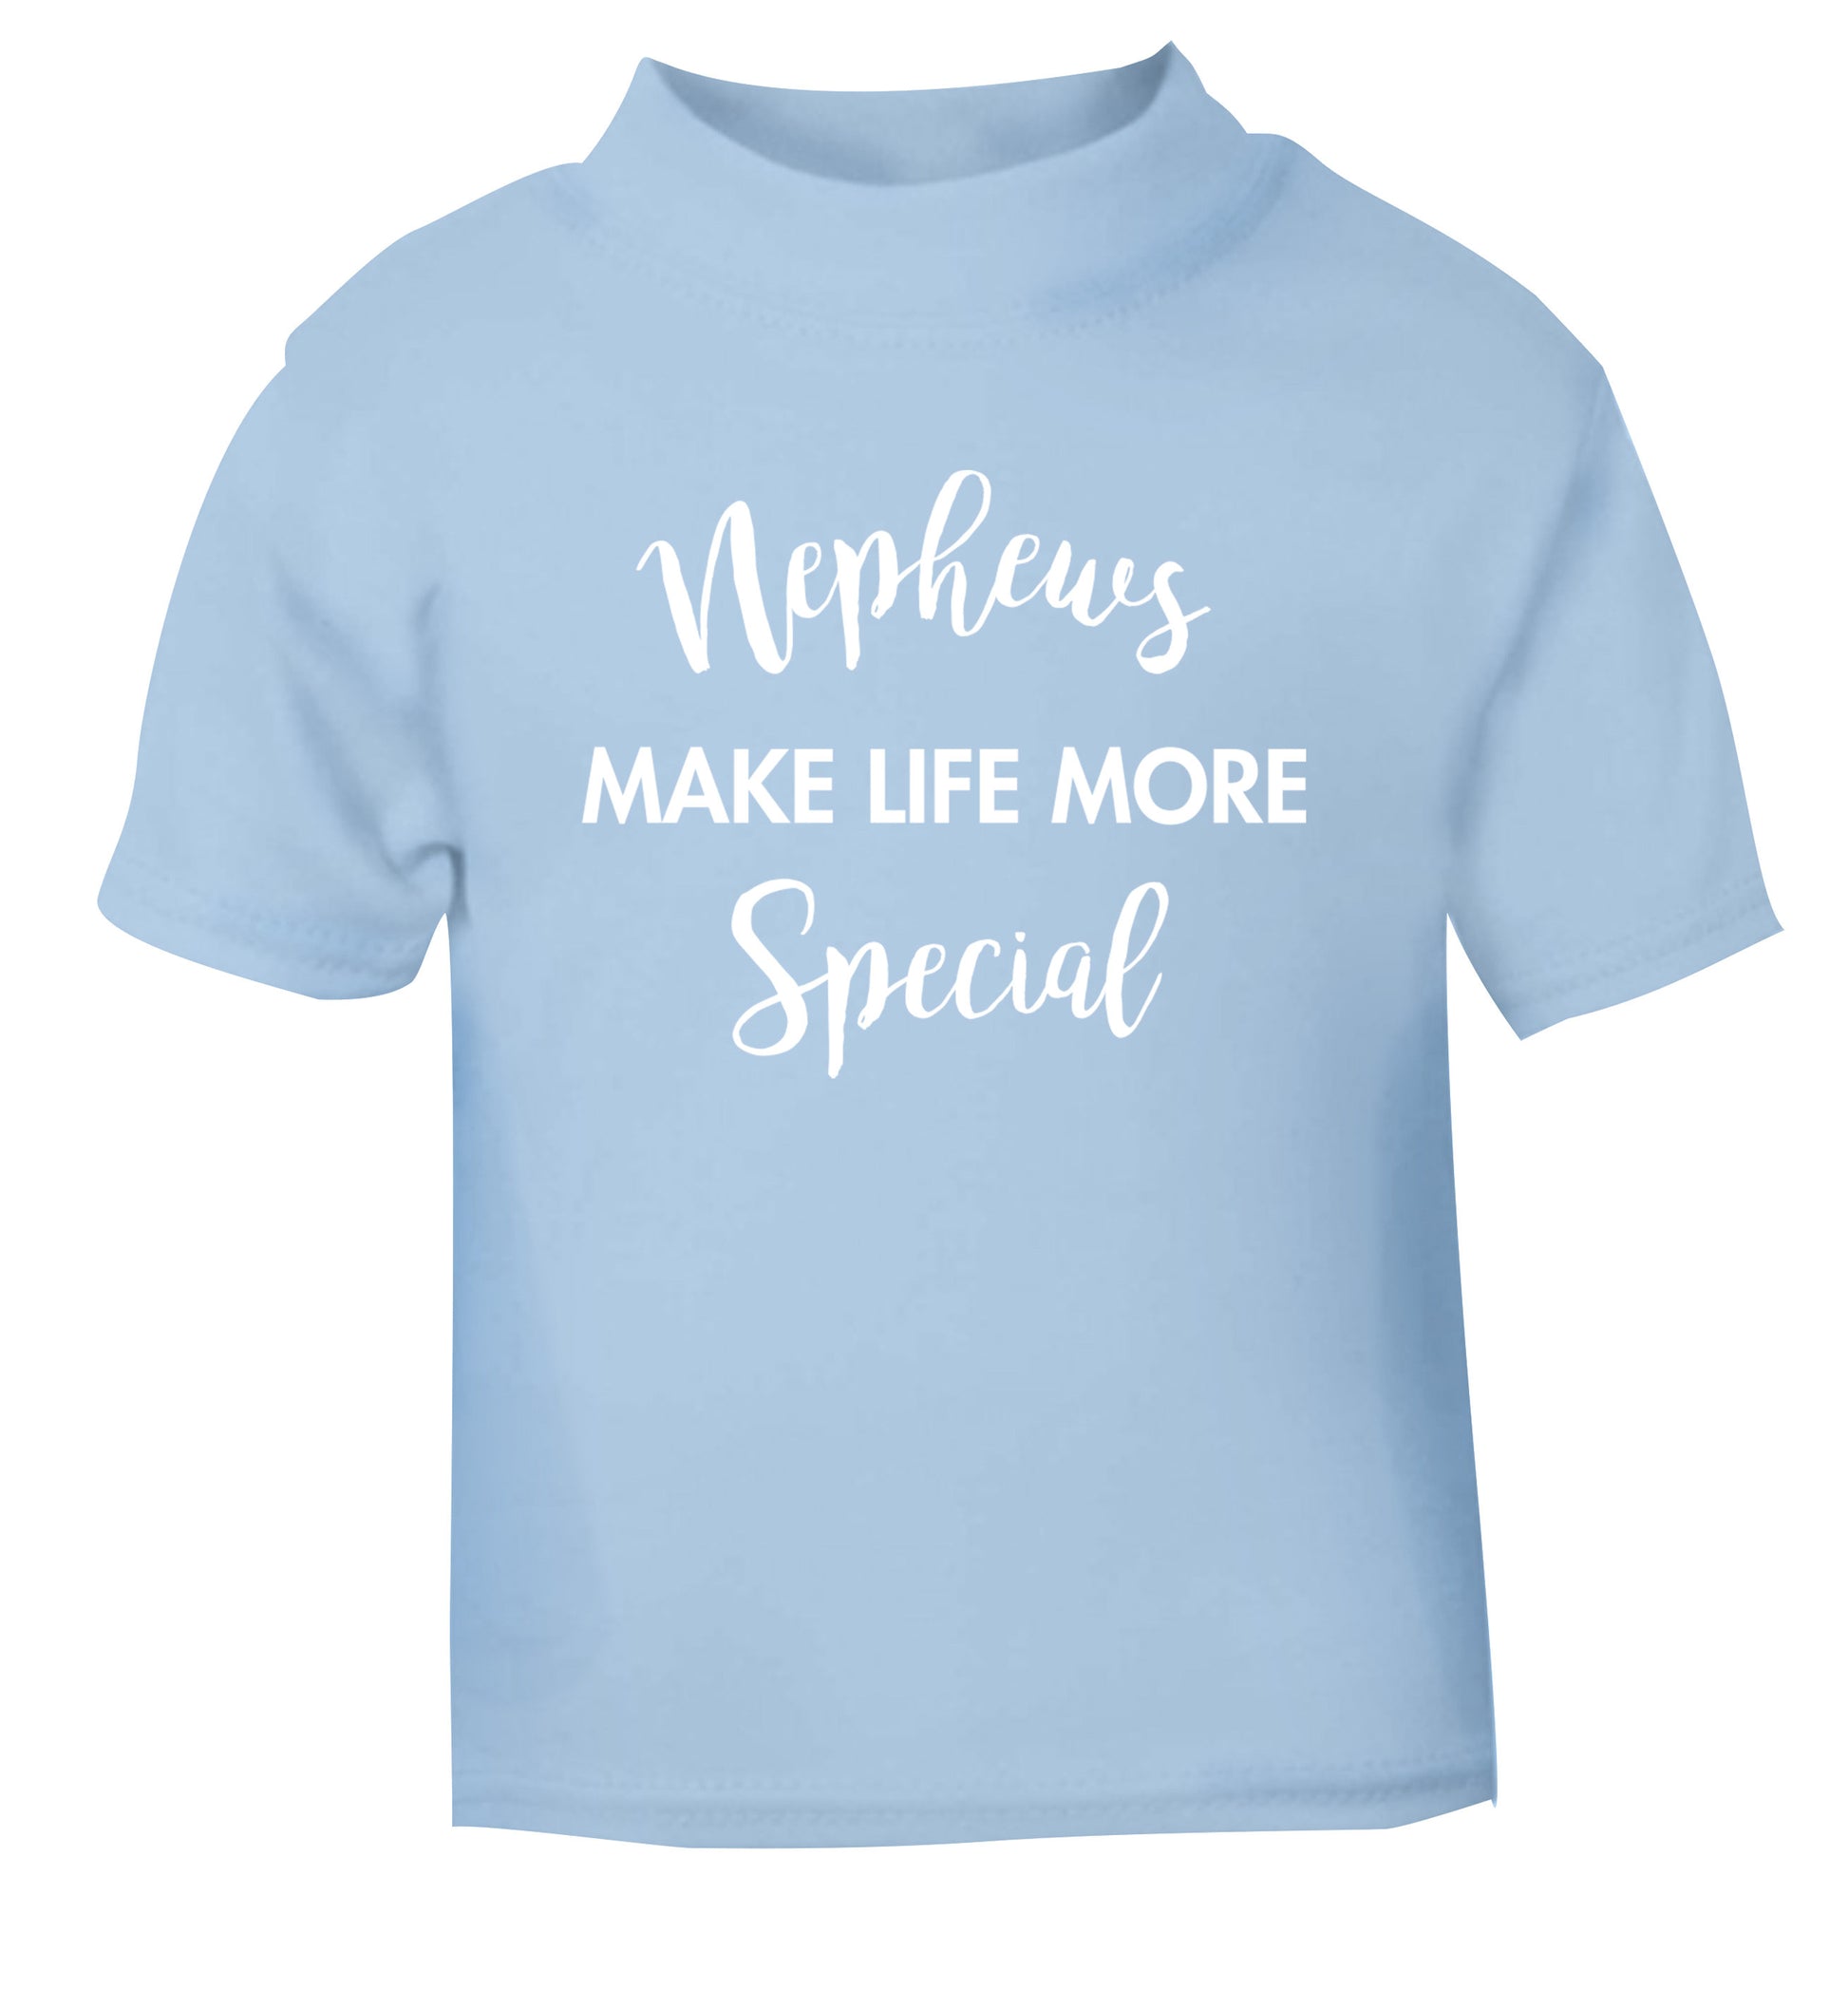 Nephews make life more special light blue Baby Toddler Tshirt 2 Years